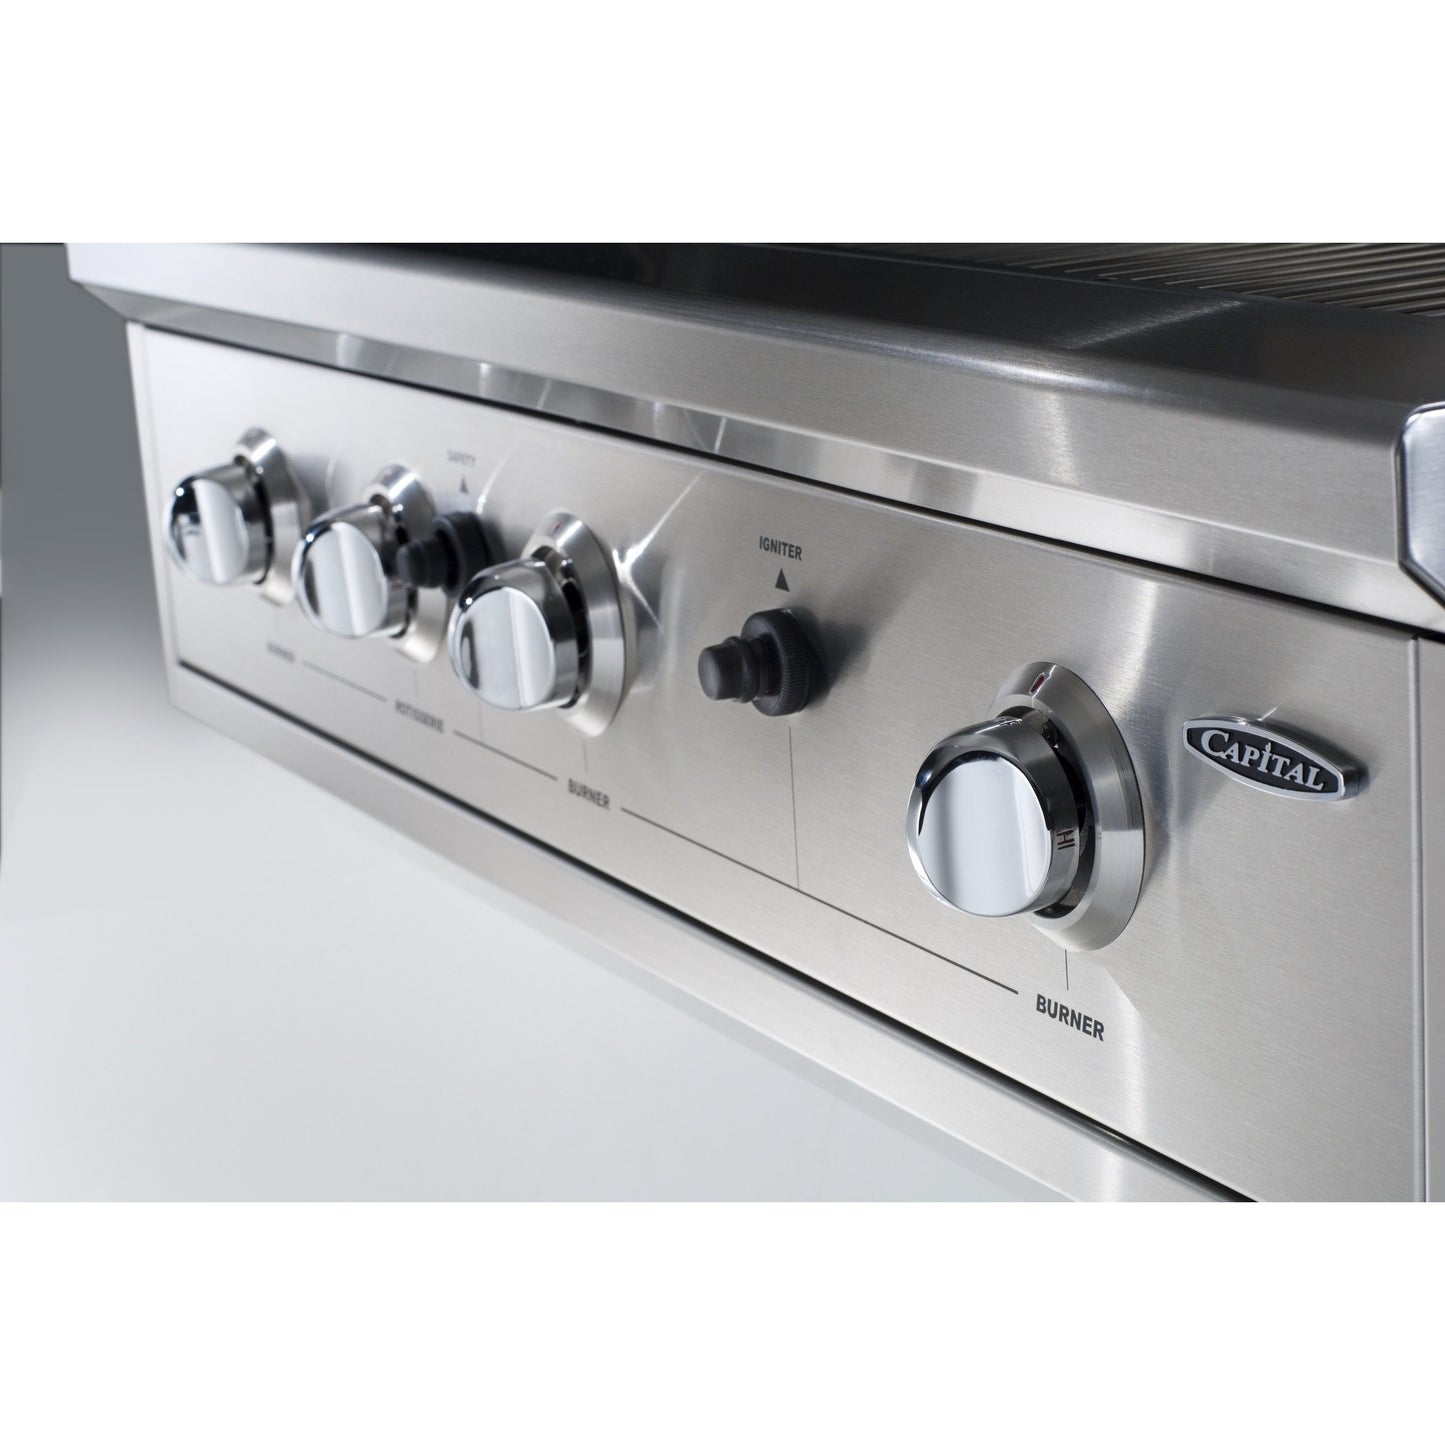 Capital Professional Series 26-Inch PRO26RBI Built-In Grill - M&K Grills